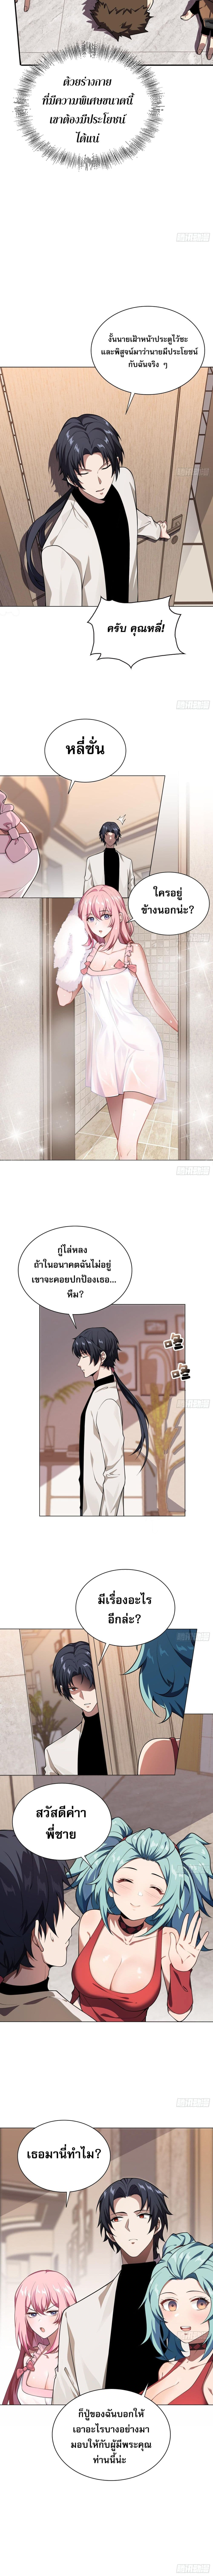 The All-Knowing Cultivator ผู้ฝึกตนผู้รอบรู้ 2/11